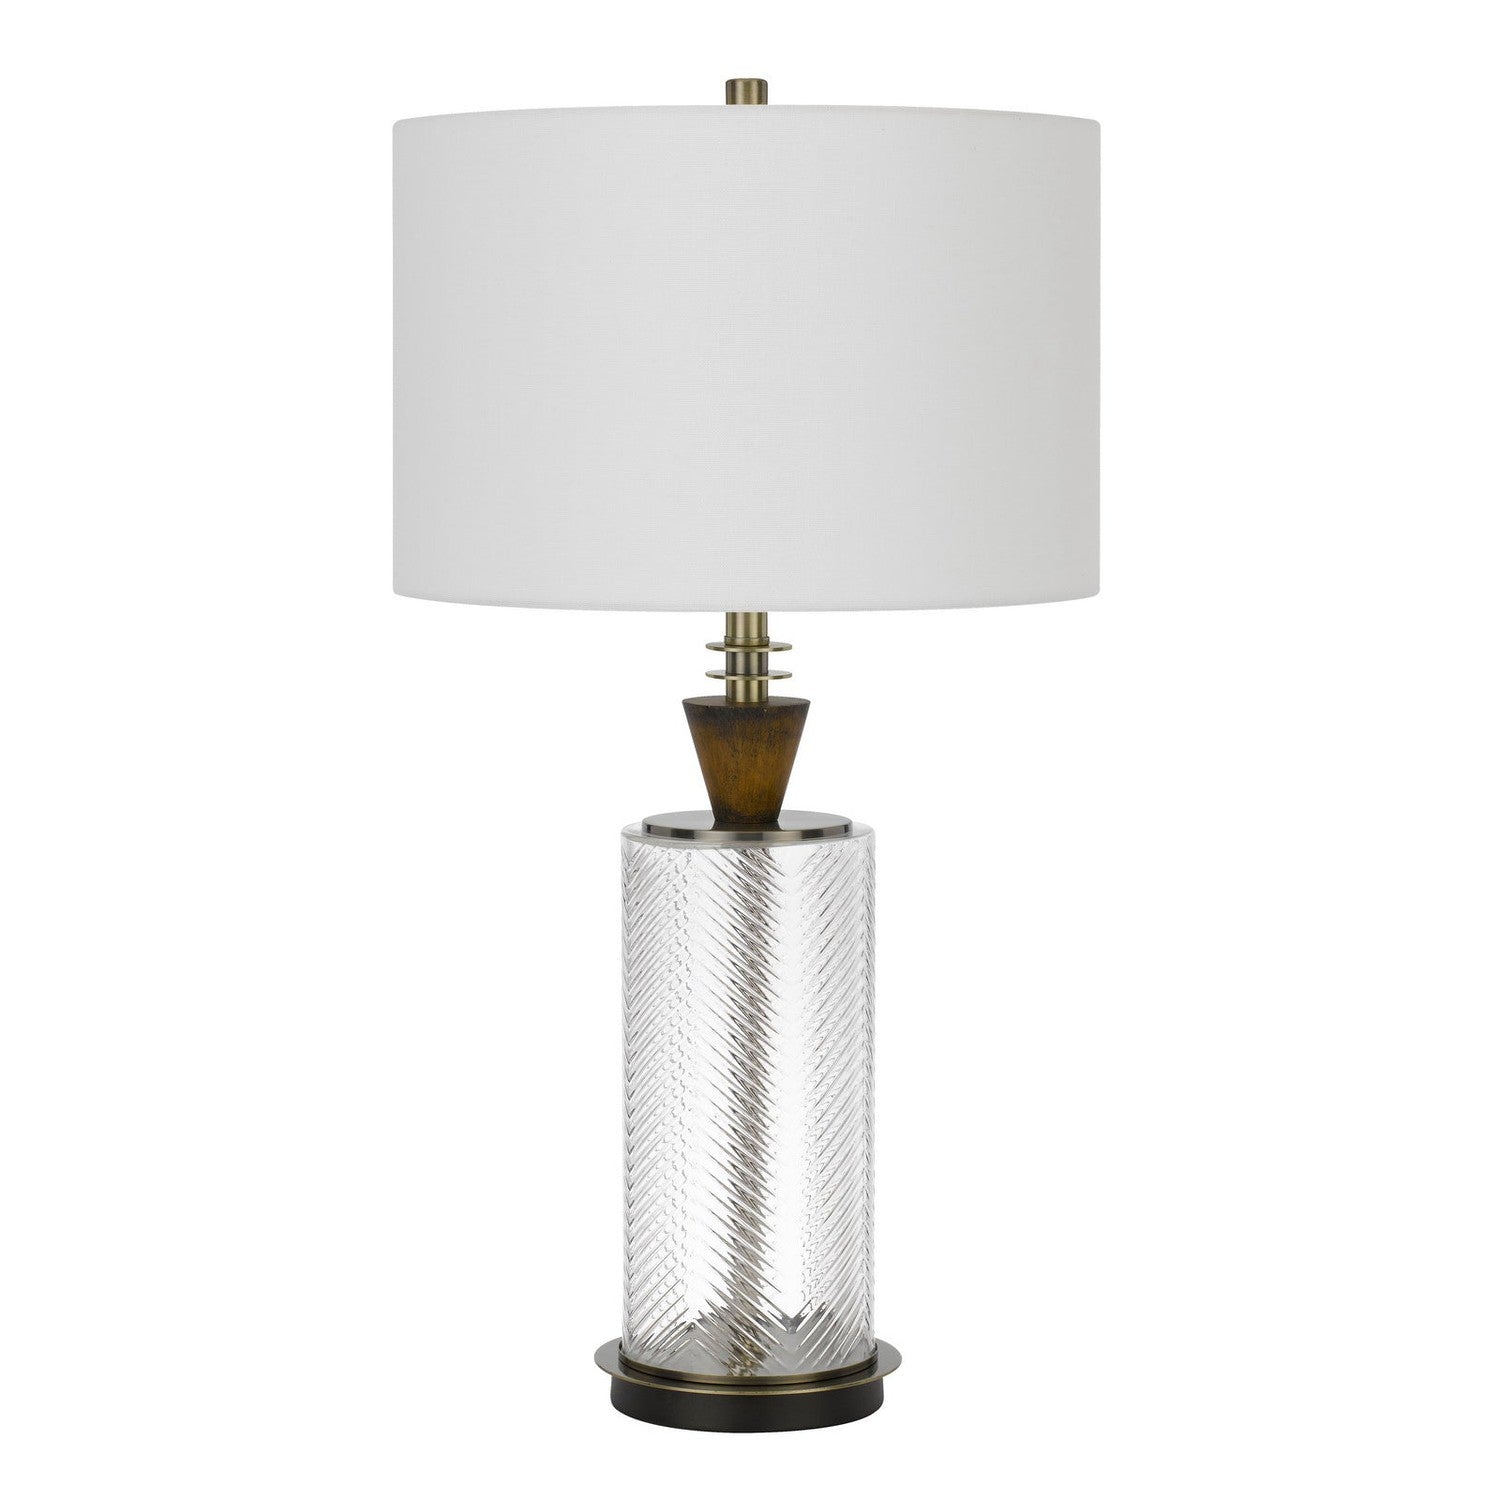 150W 3 way Sherwood glass table lamp with wood font and hardback fabric drum shade-Cal Lighting-CAL-BO-2987TB-Table Lamps-1-France and Son